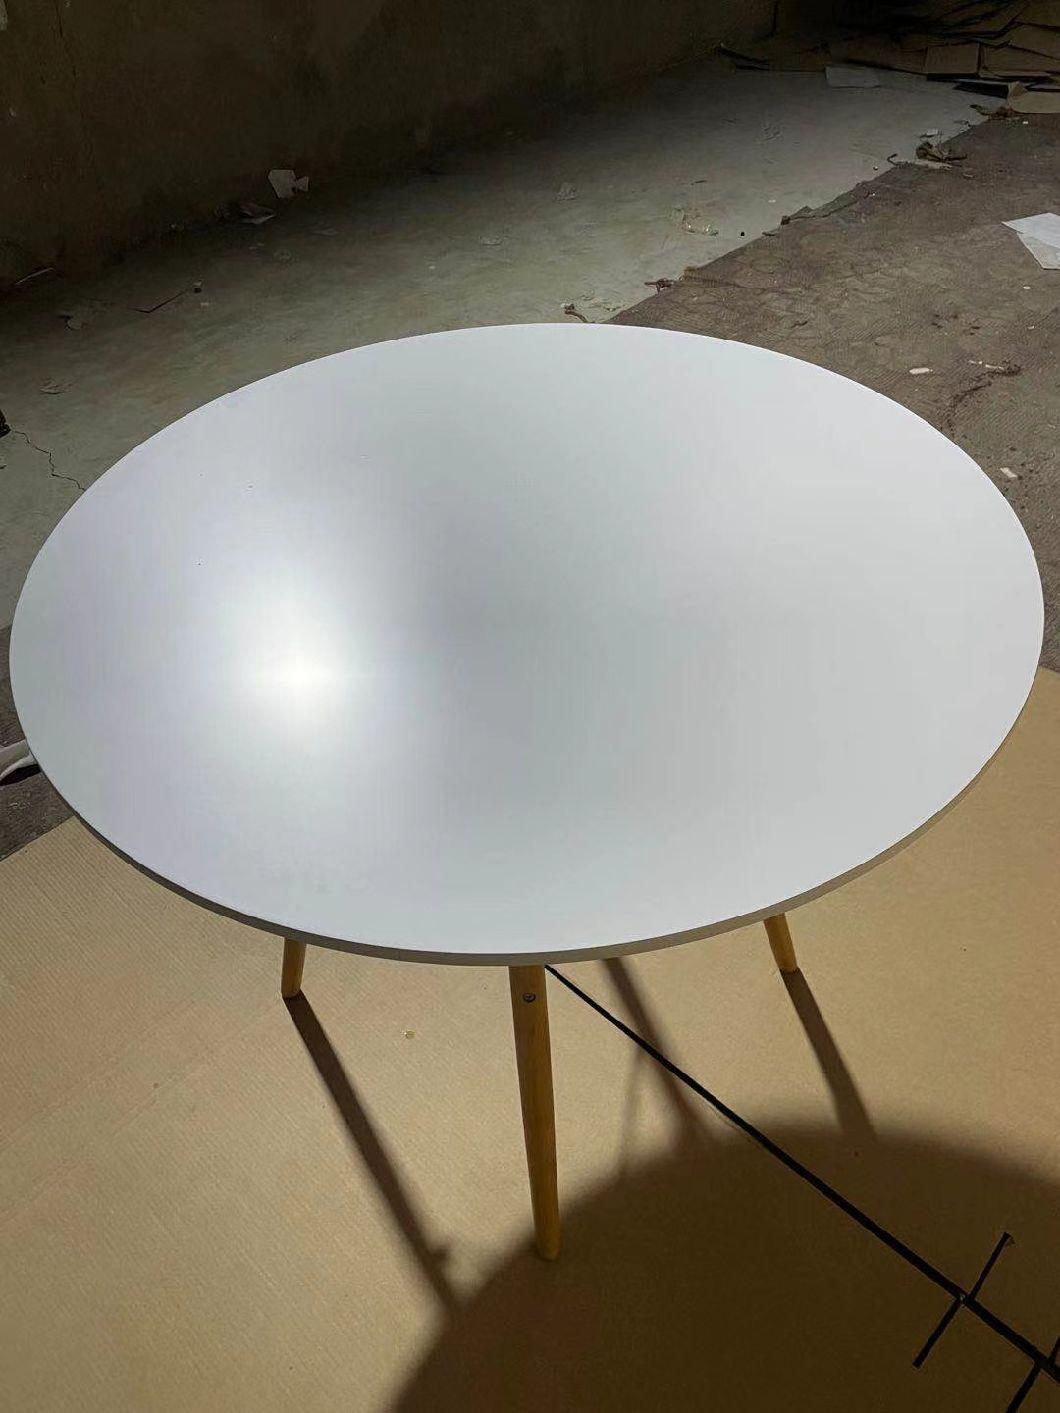 80cm Round Dining Room Small Round Glass Table for Coffee